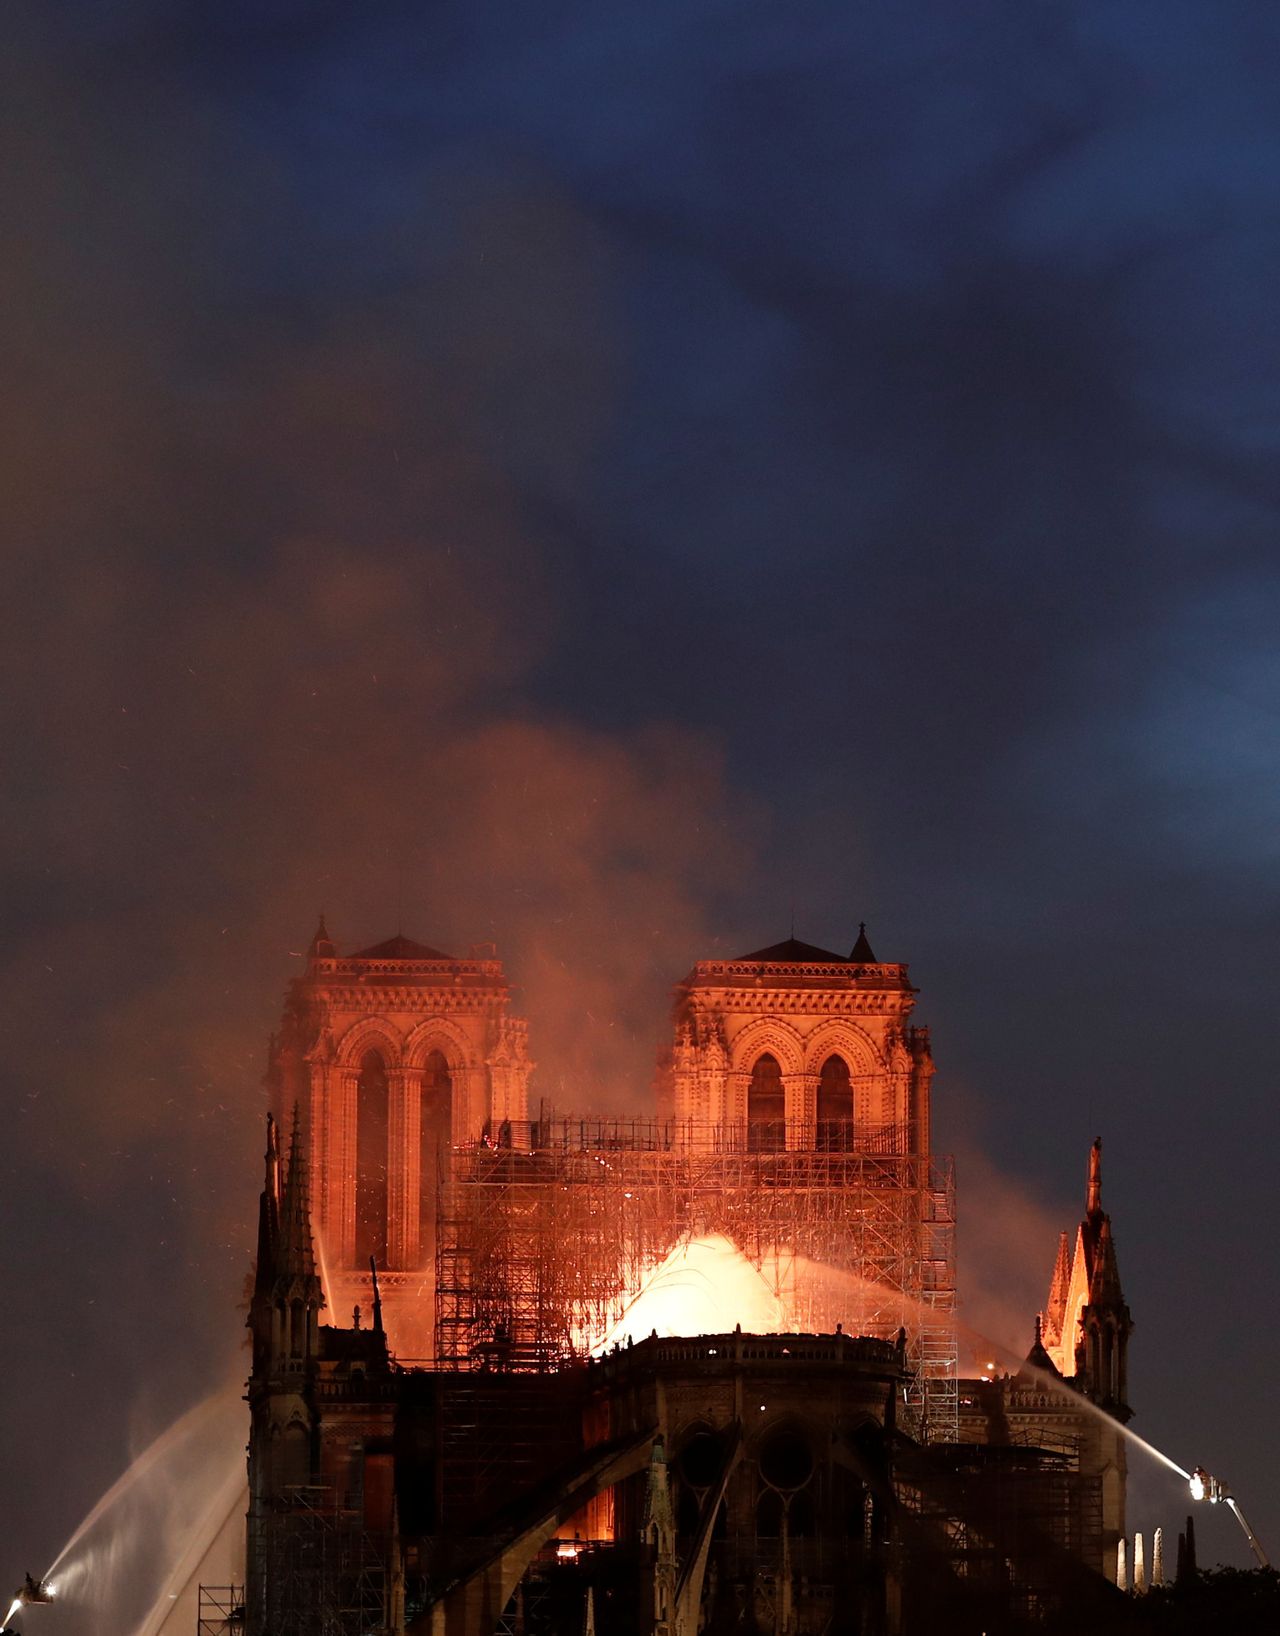 Flames engulf the roof at Notre Dame cathedral as firefighters battle to extinguish the fire on Monday night.